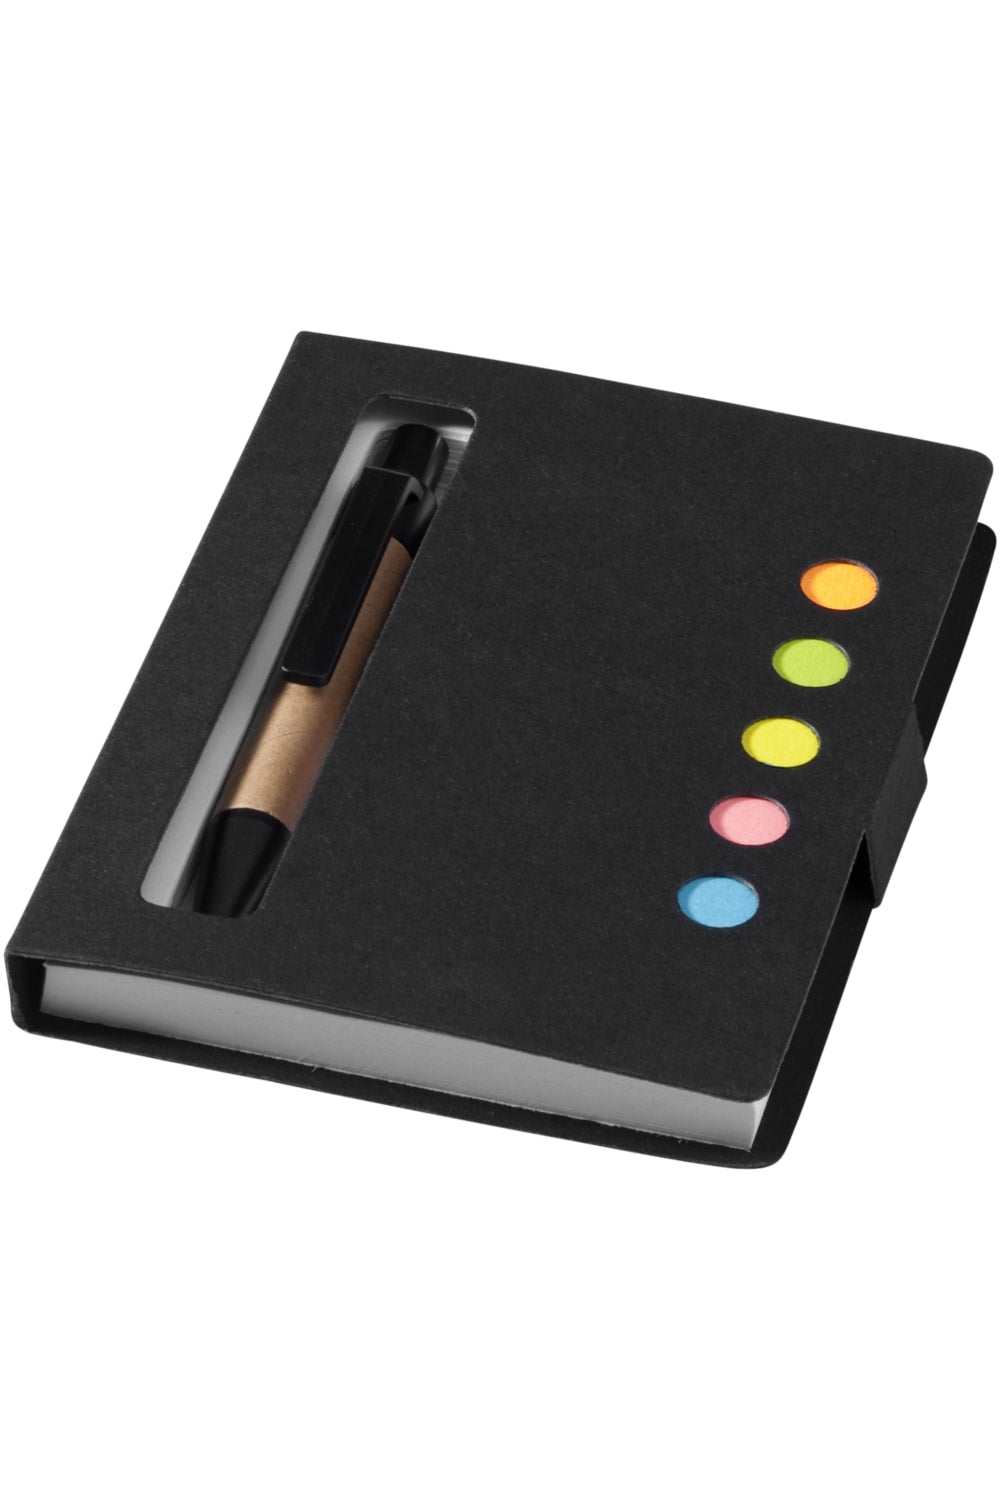 Bullet Reveal Sticky Notes Book And Pen (Solid Black) (4.1 x 3.1 x 0.4 inches)